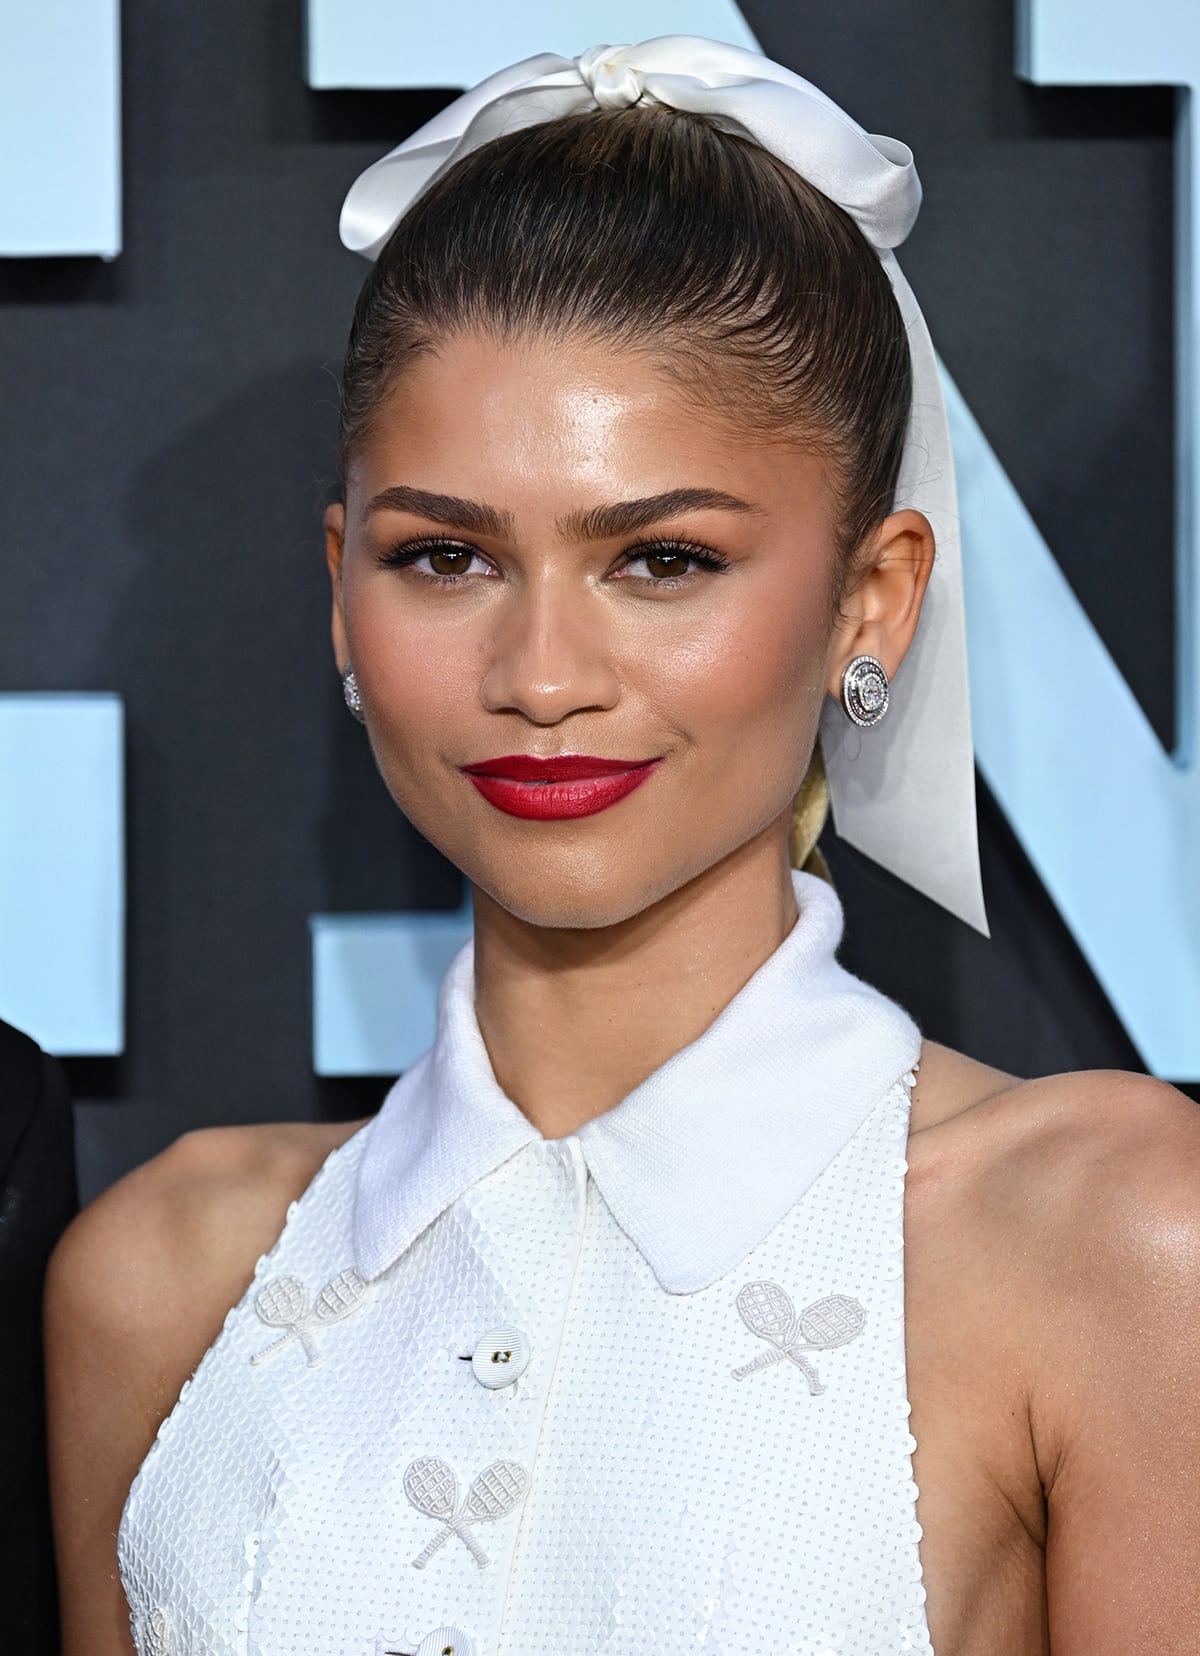 Zendaya pulls her blonde hair into a neat braided ponytail with a large white bow for a coquette touch and adds bright red lipstick to the all-white look